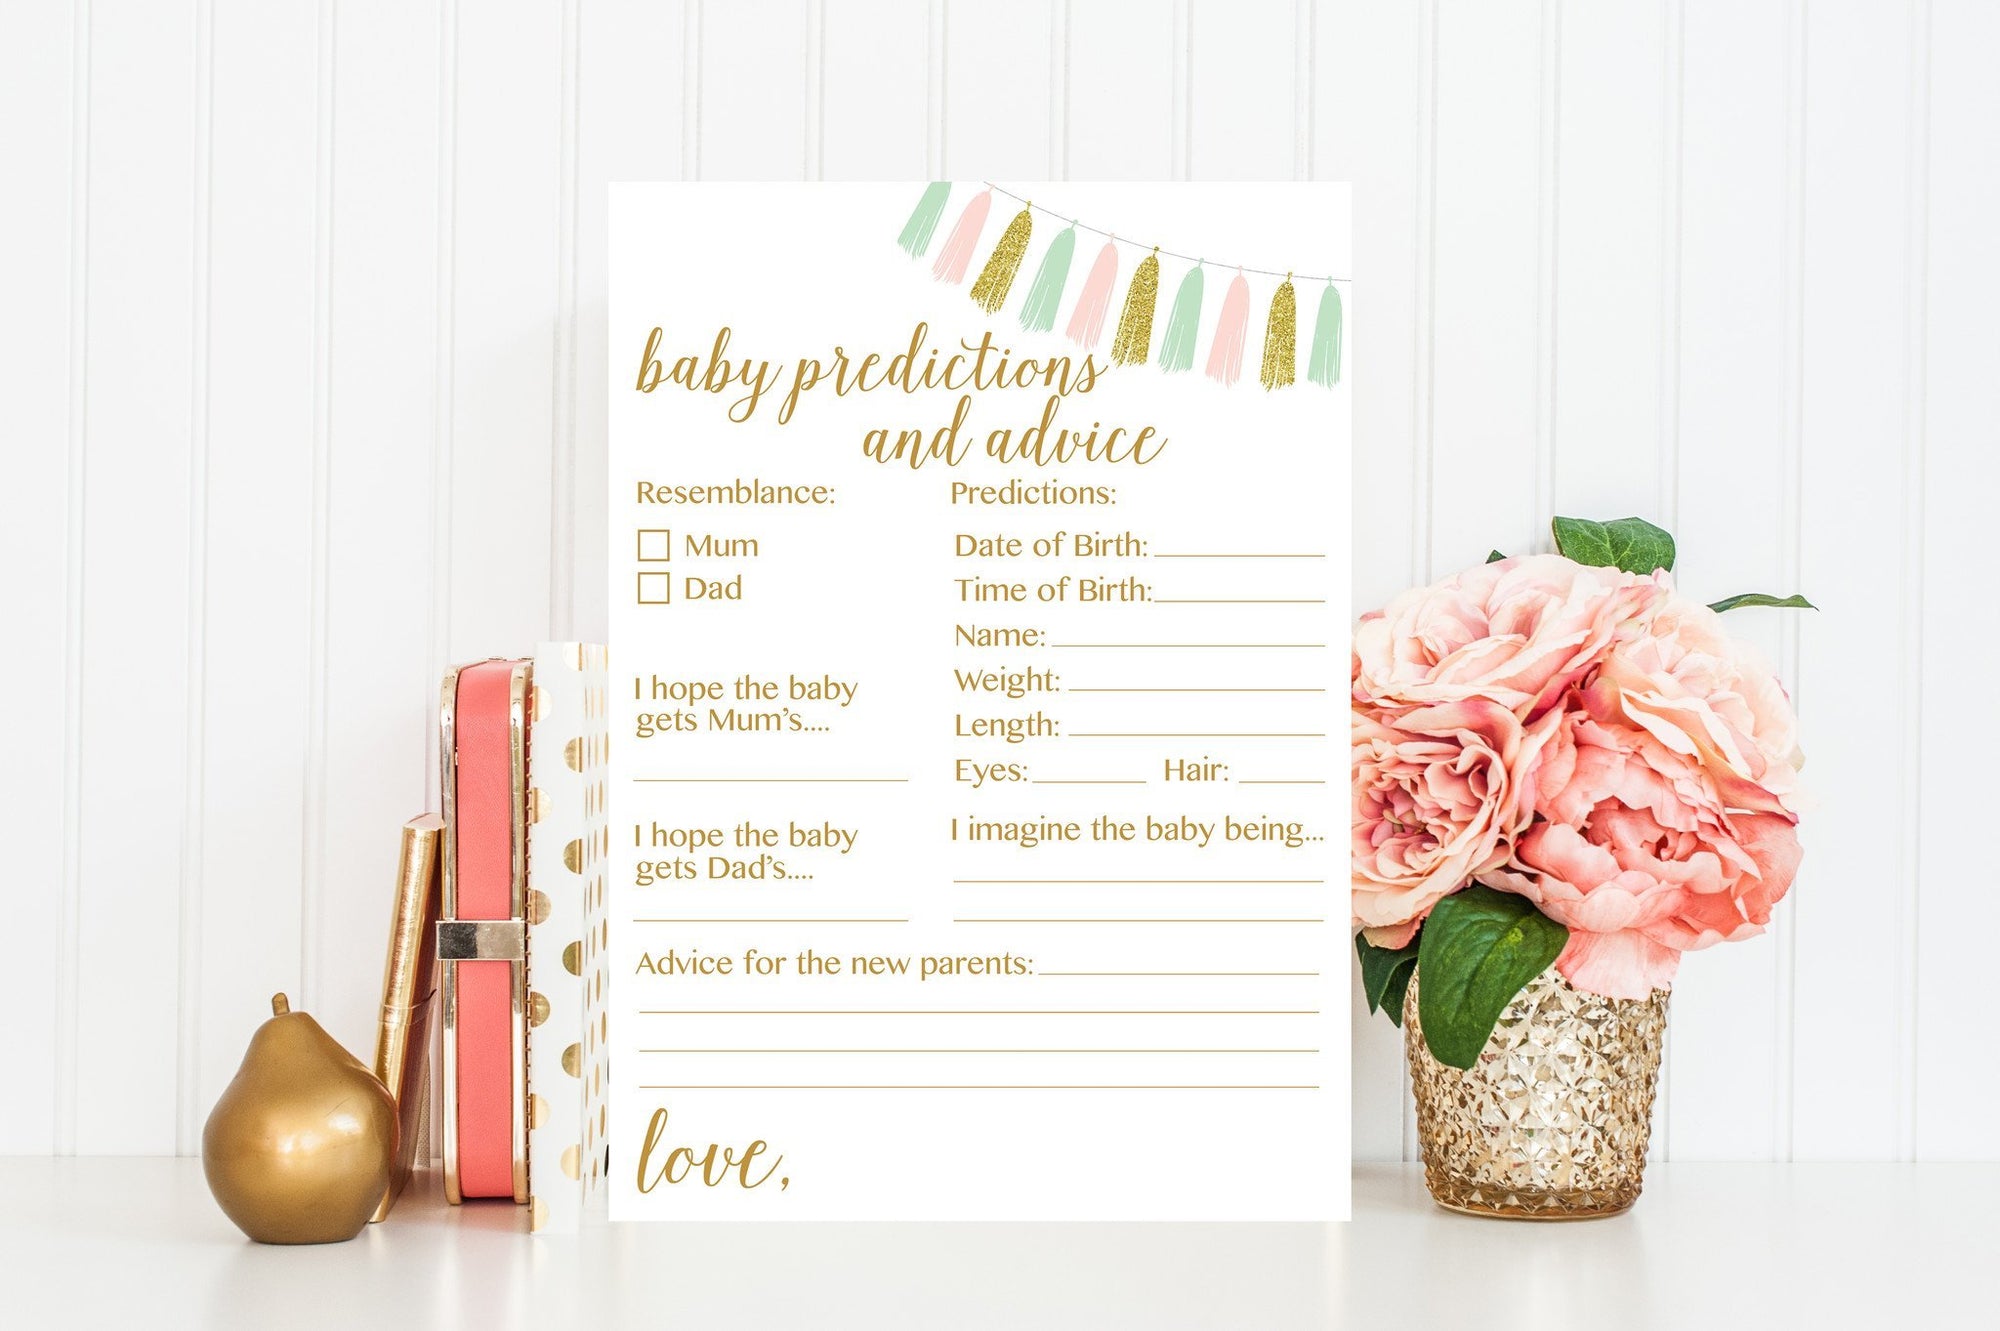 Baby Predictions and Advice (Mum Version) - Pink, Mint & Gold Tassel Printable - Pretty Collected